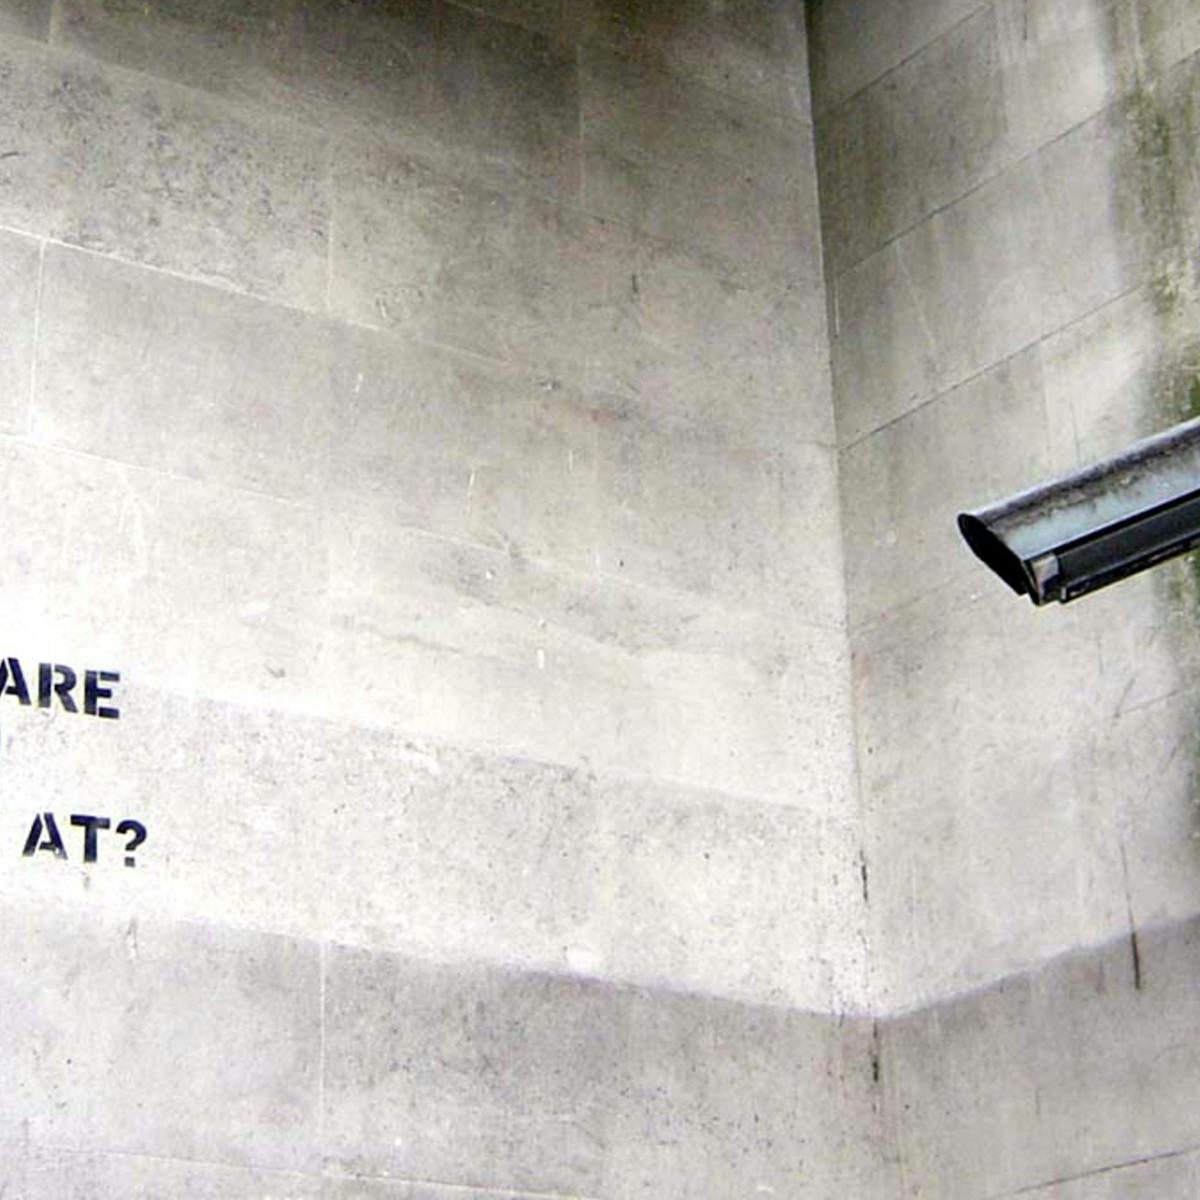 Photograph of a CCTV camera pointing at the stencilled words "What are you looking at?"